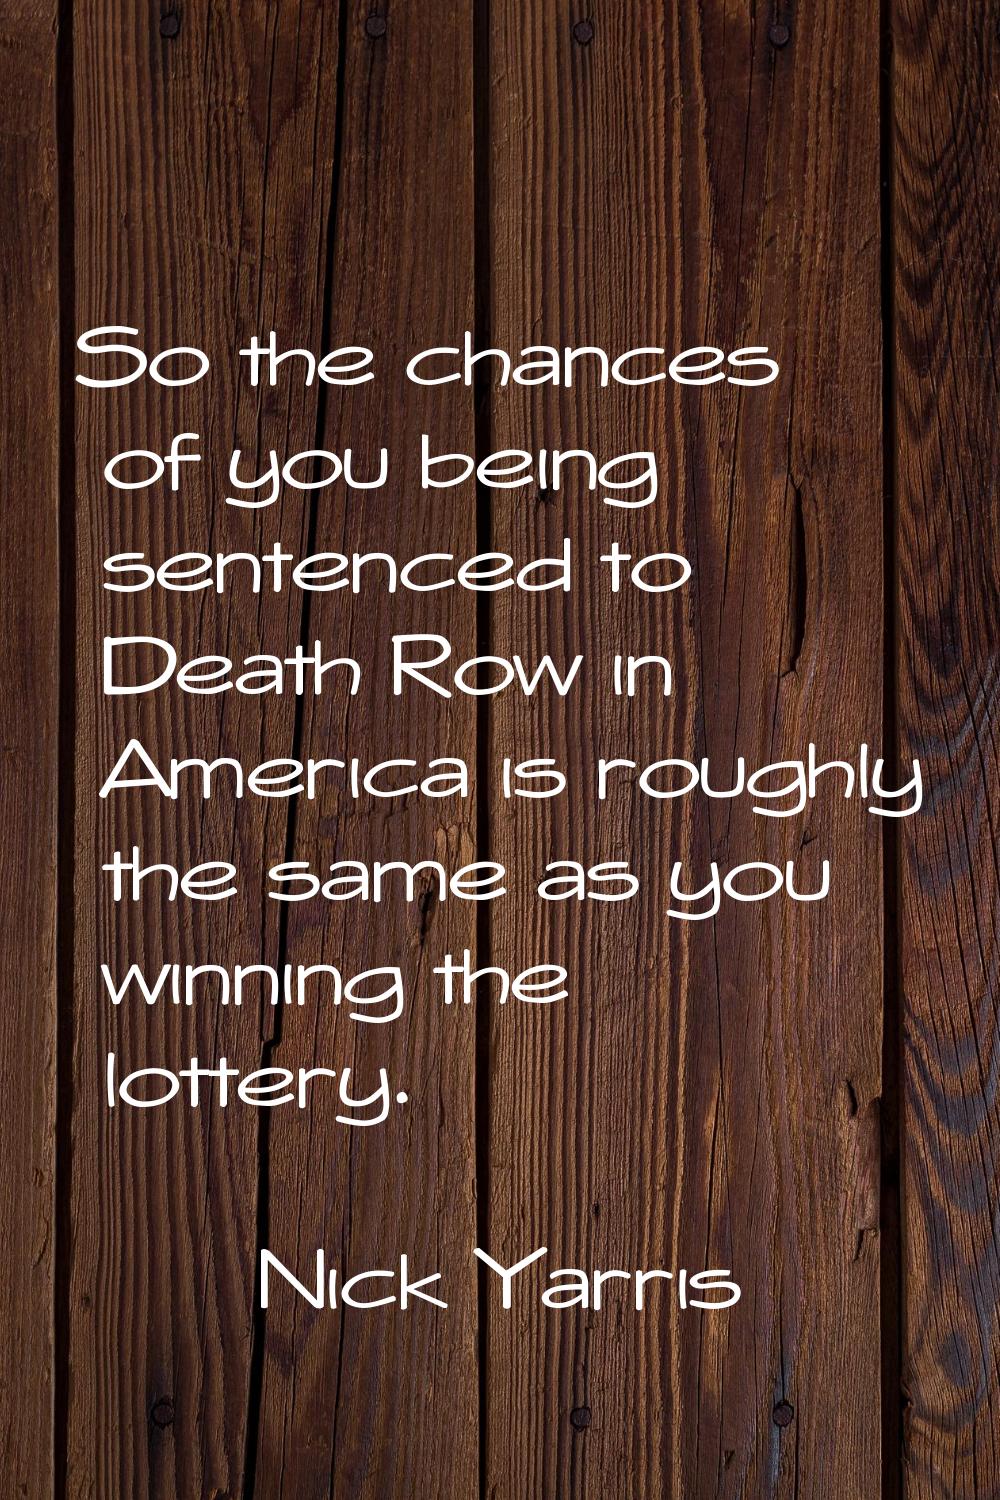 So the chances of you being sentenced to Death Row in America is roughly the same as you winning th